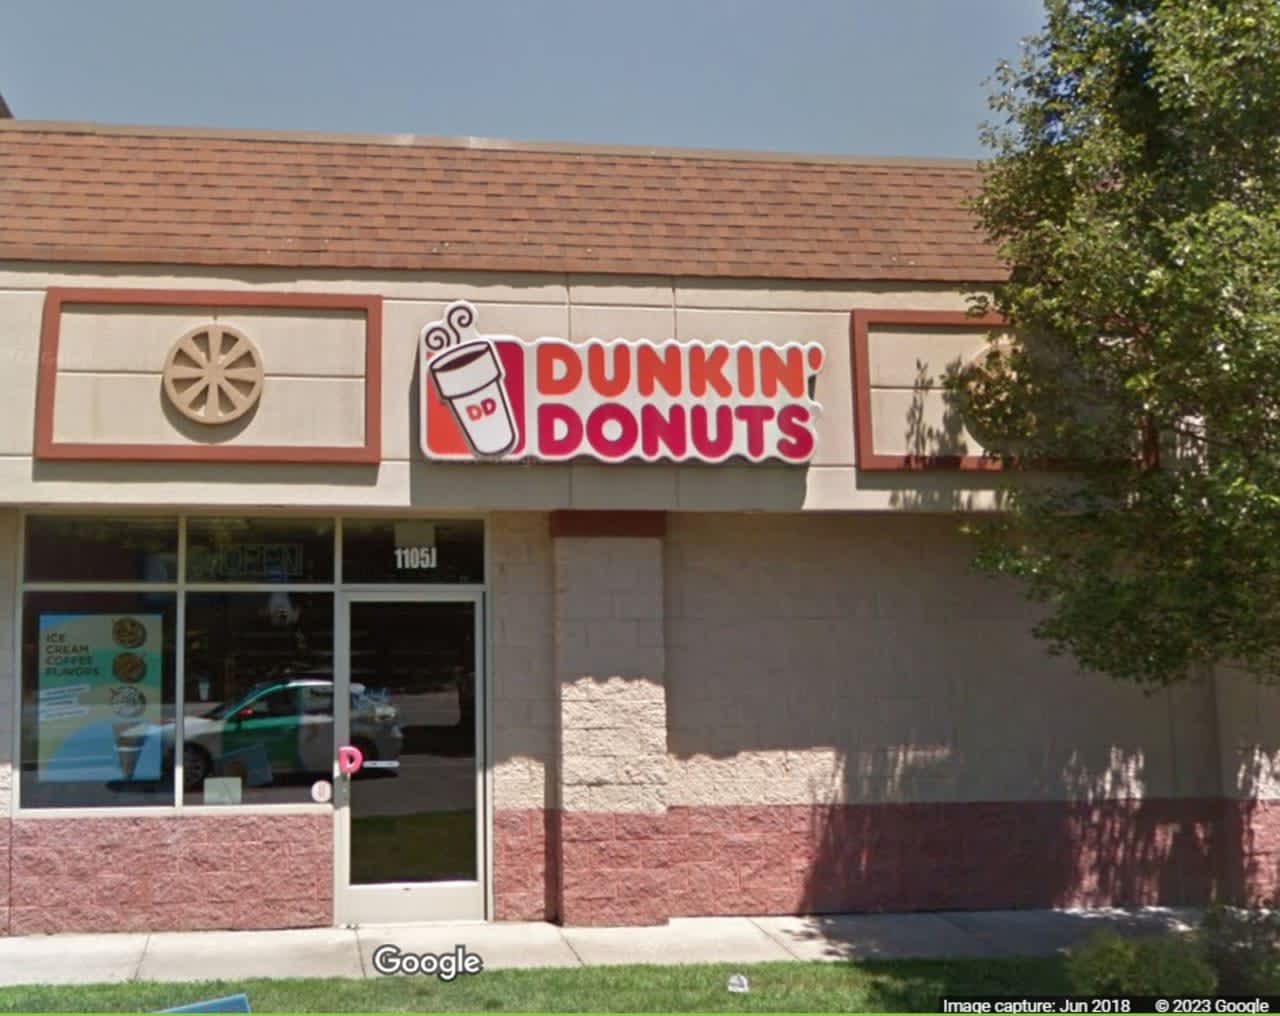 Three people are facing charges after allegedly breaking in and stealing thousands of dollars from several Dunkin’ Donuts locations on Long Island.